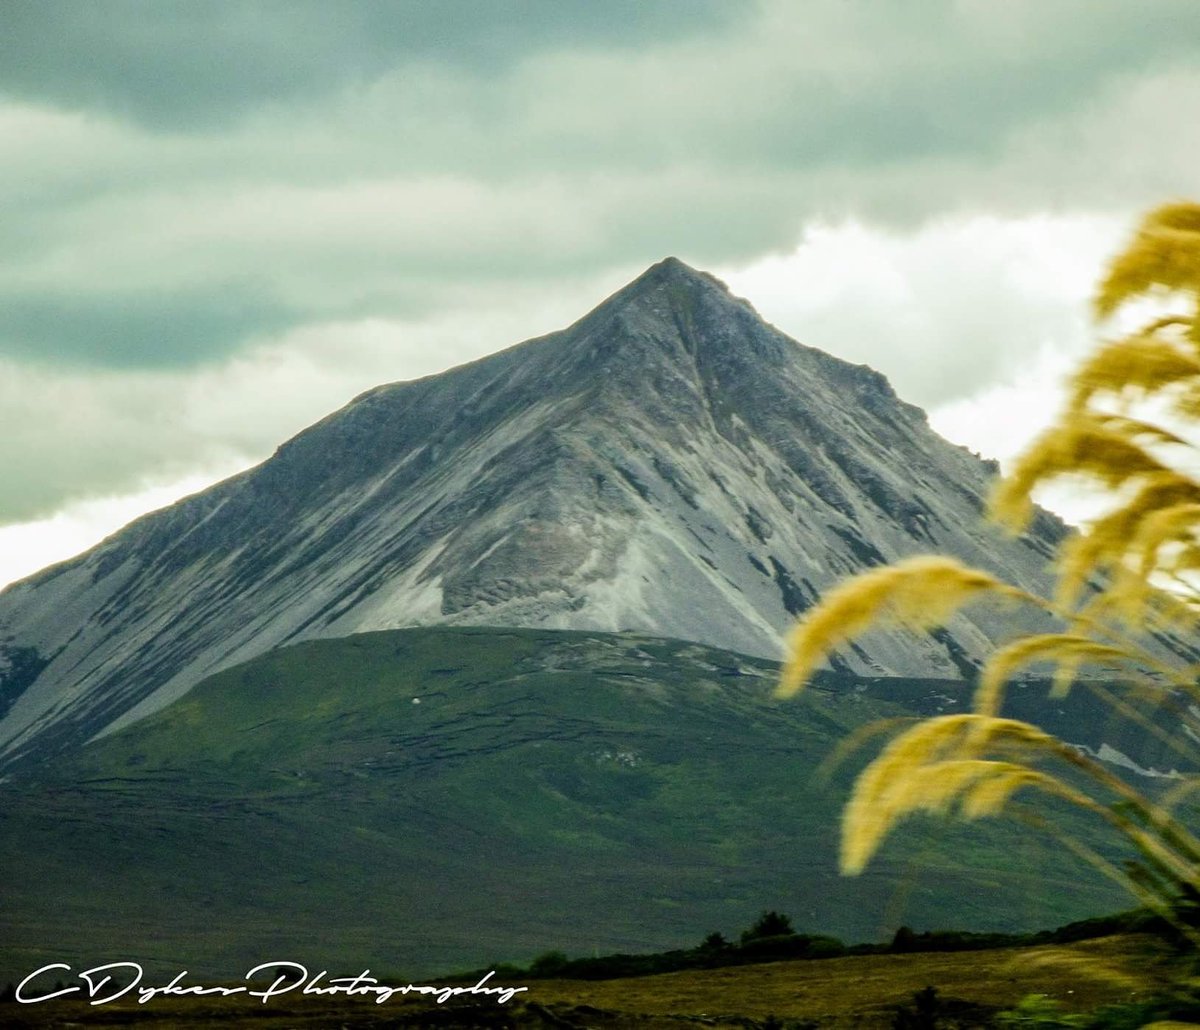 Mt Errigal in all its glory #donegal #errigal #cdykesphotography #landscape